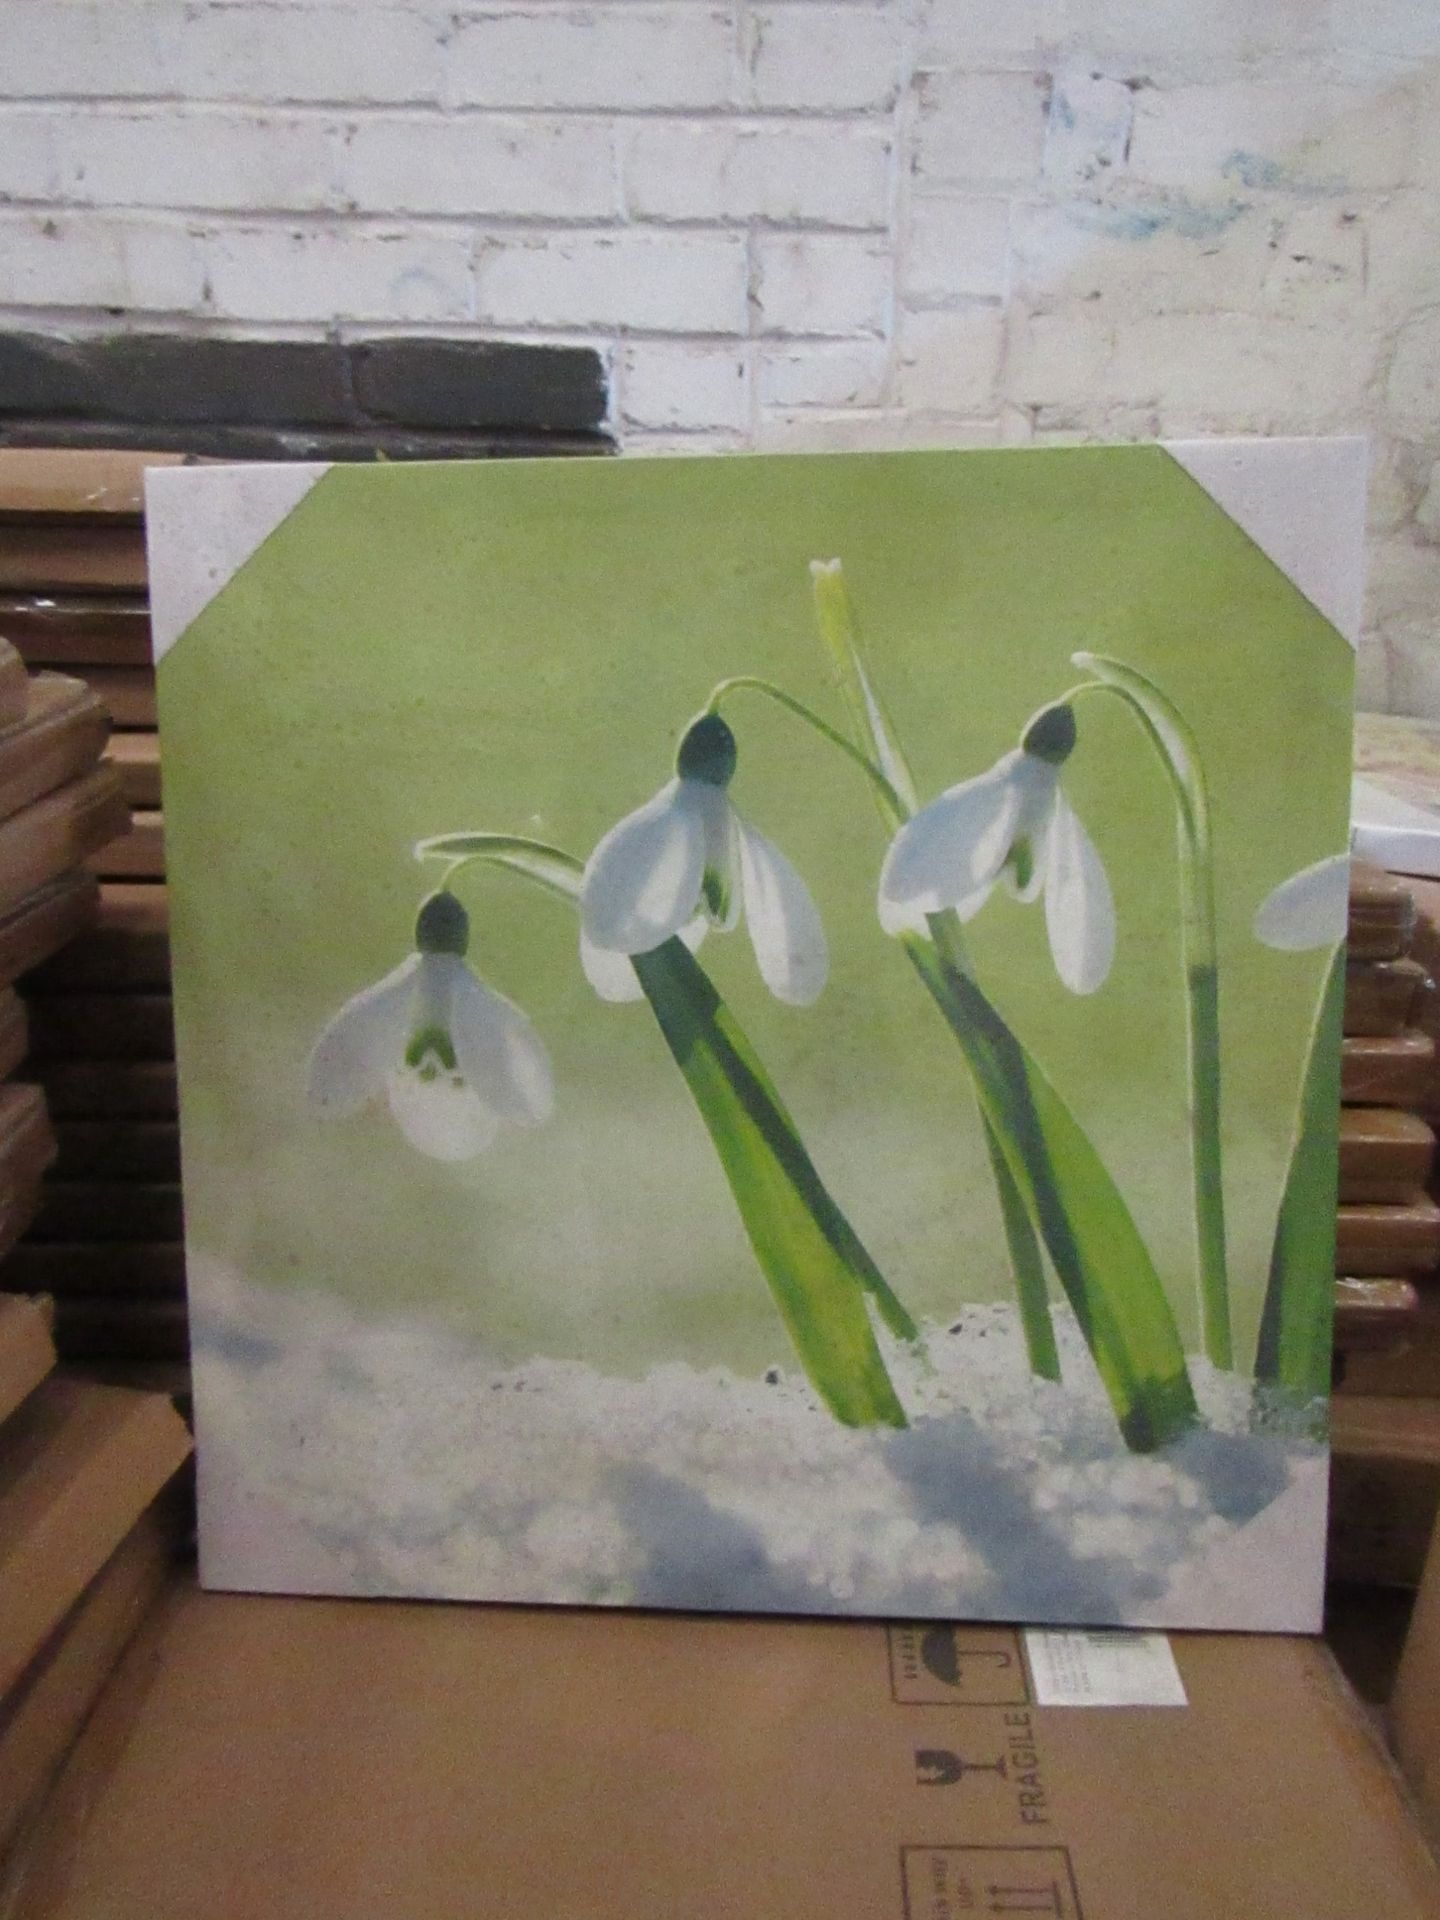 10 x "Snowdrops" Canvas Prints 48cm x 48cm new & packaged